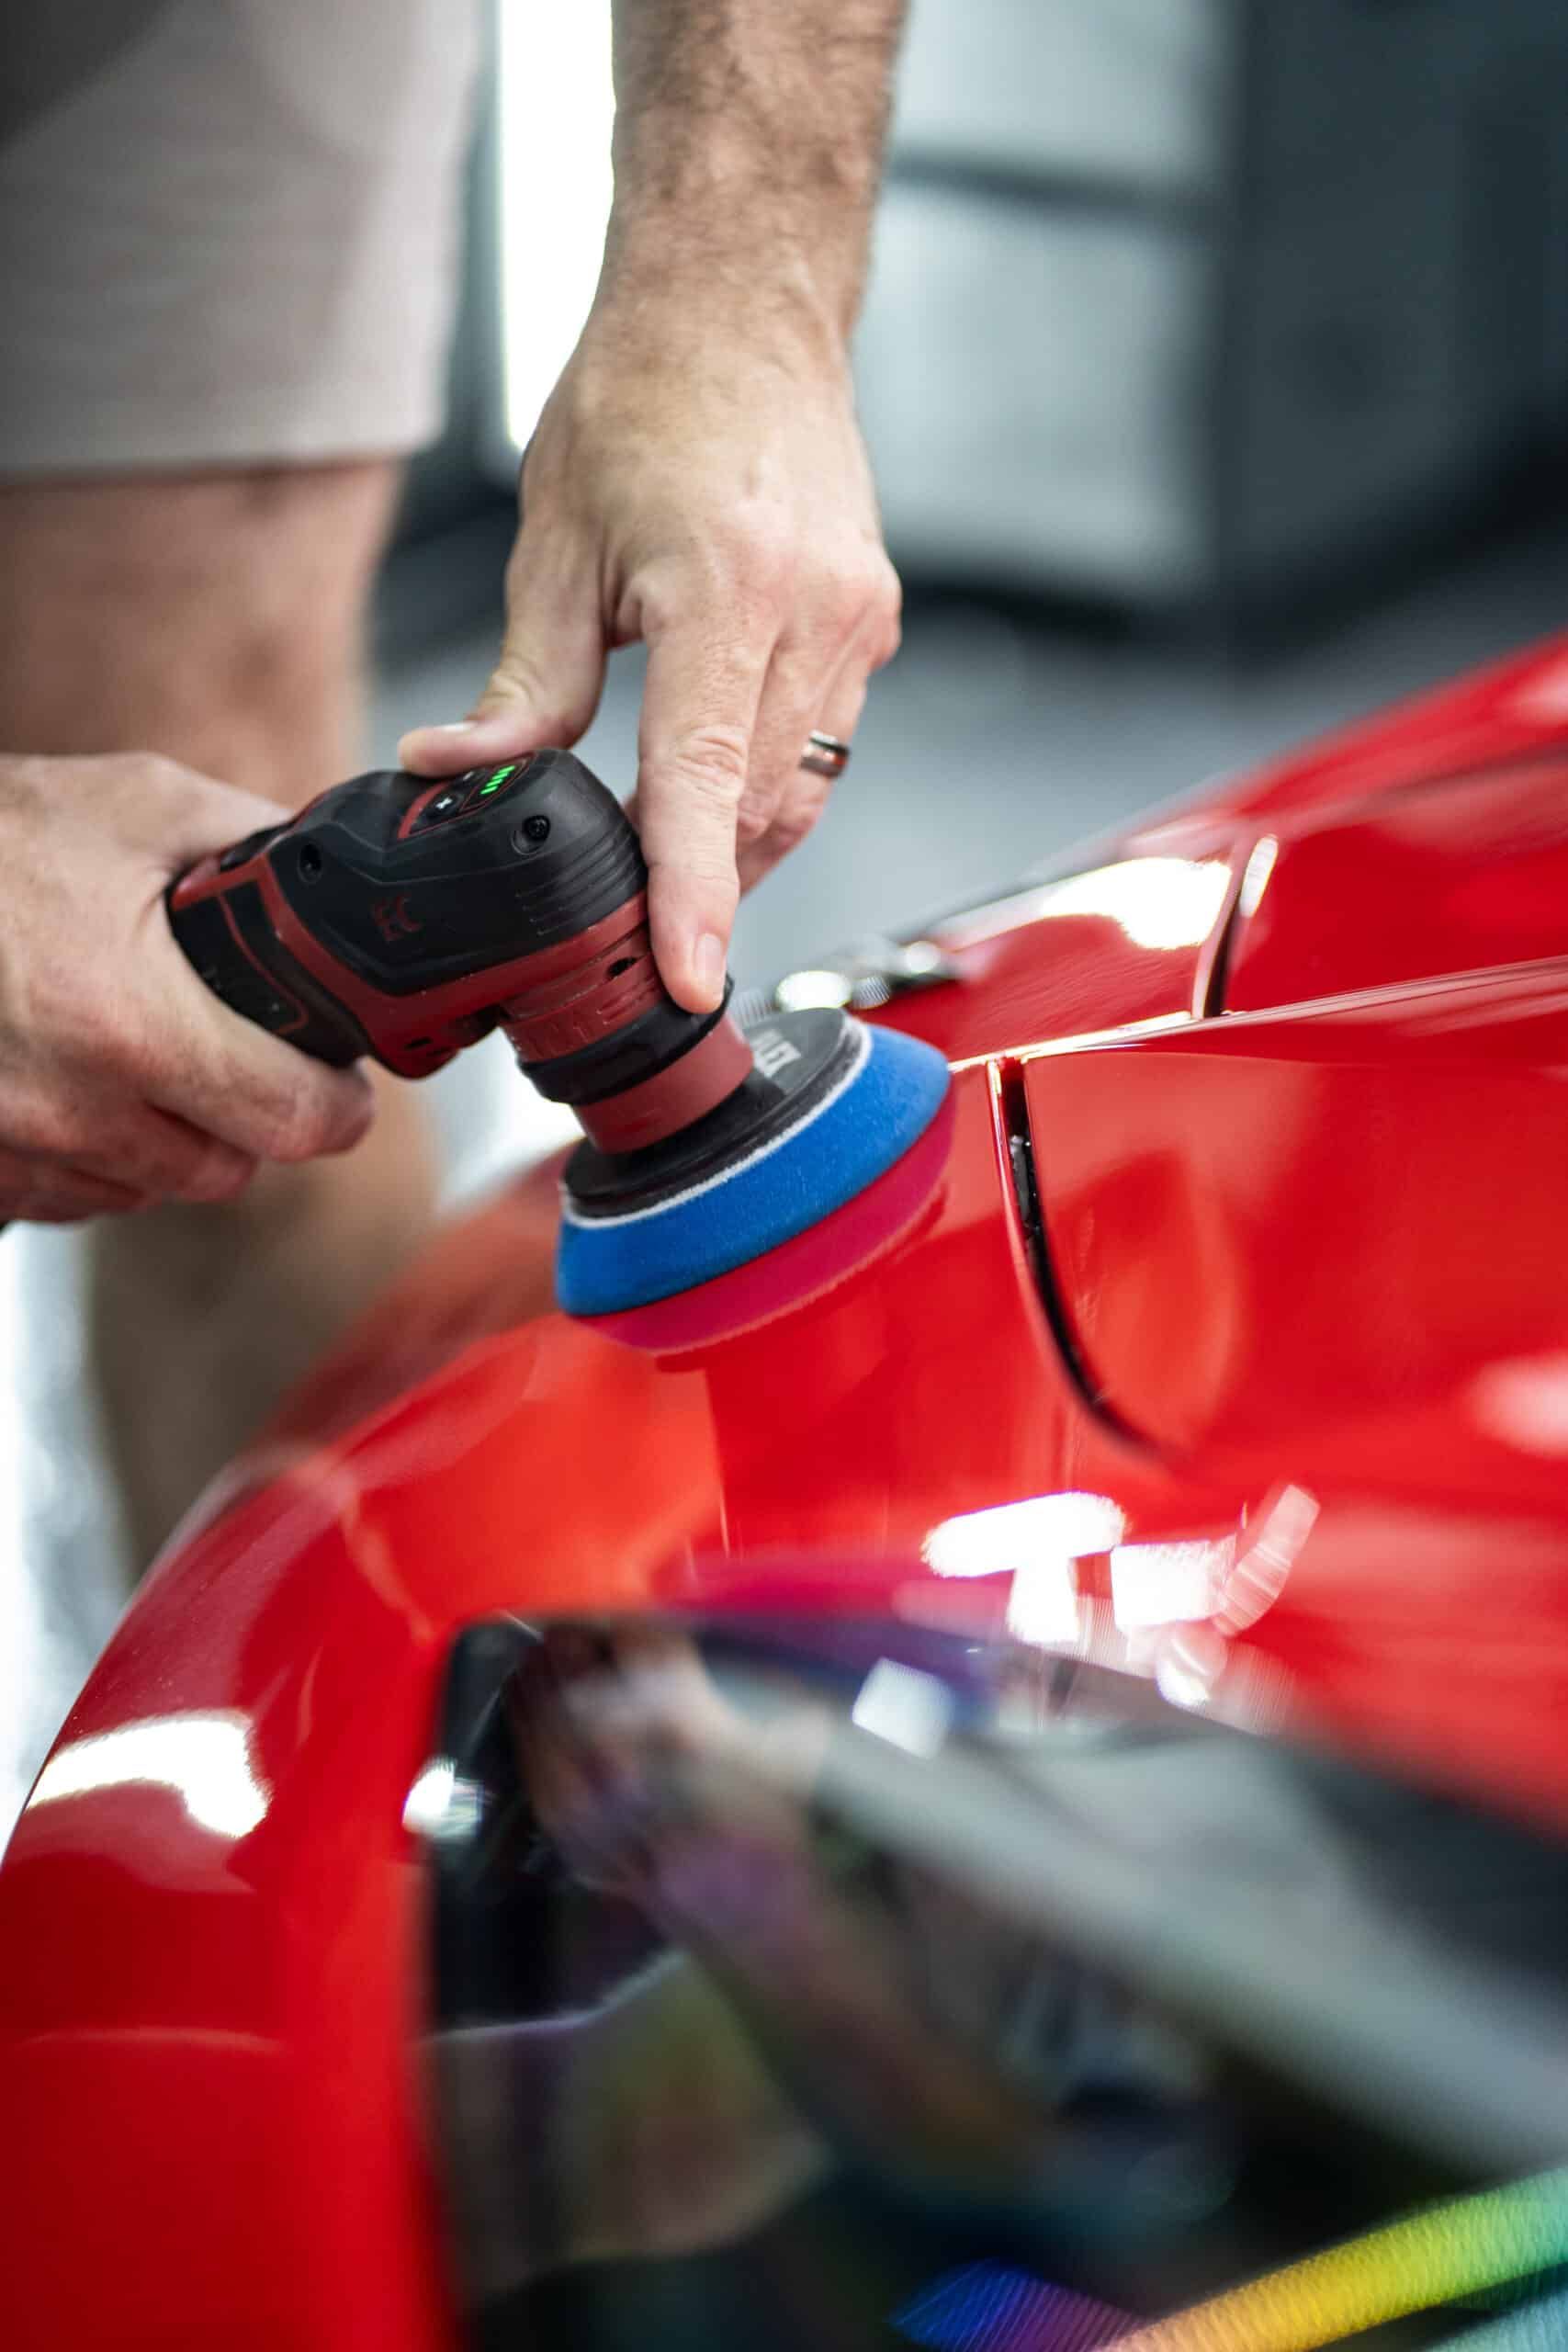 A man is polishing a red car with a machine.